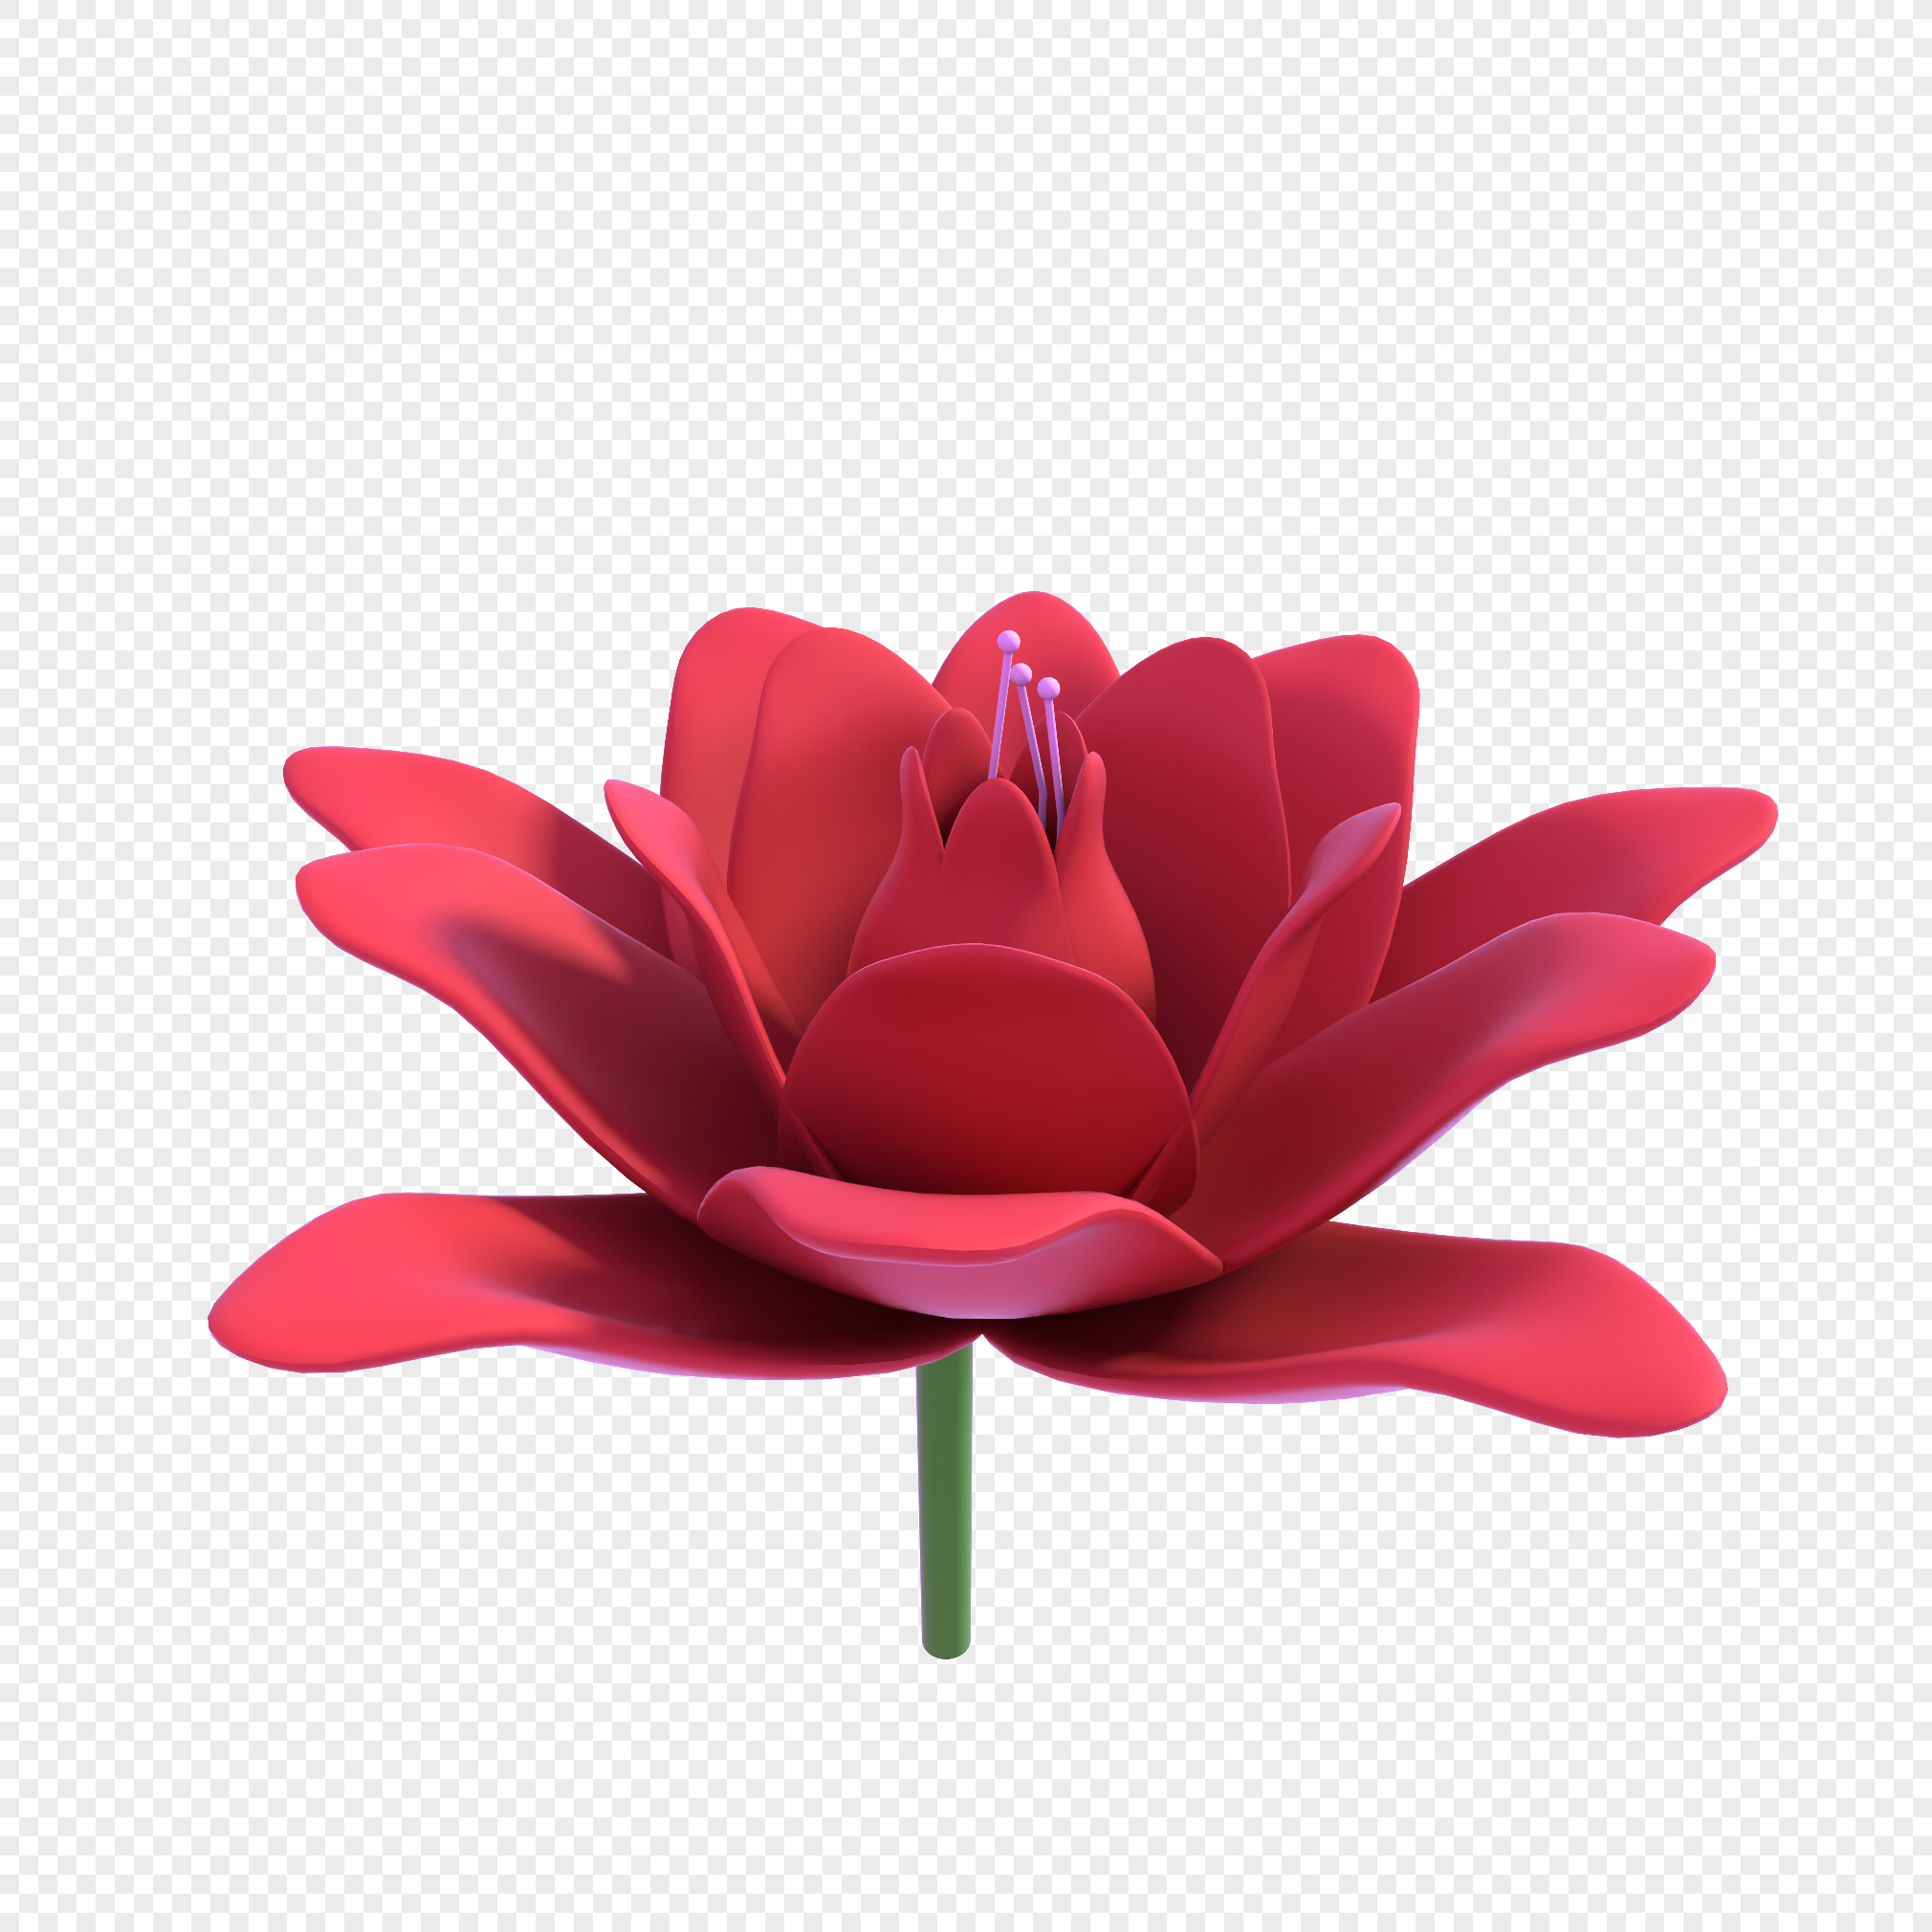 One Flower PNG Images With Transparent Background